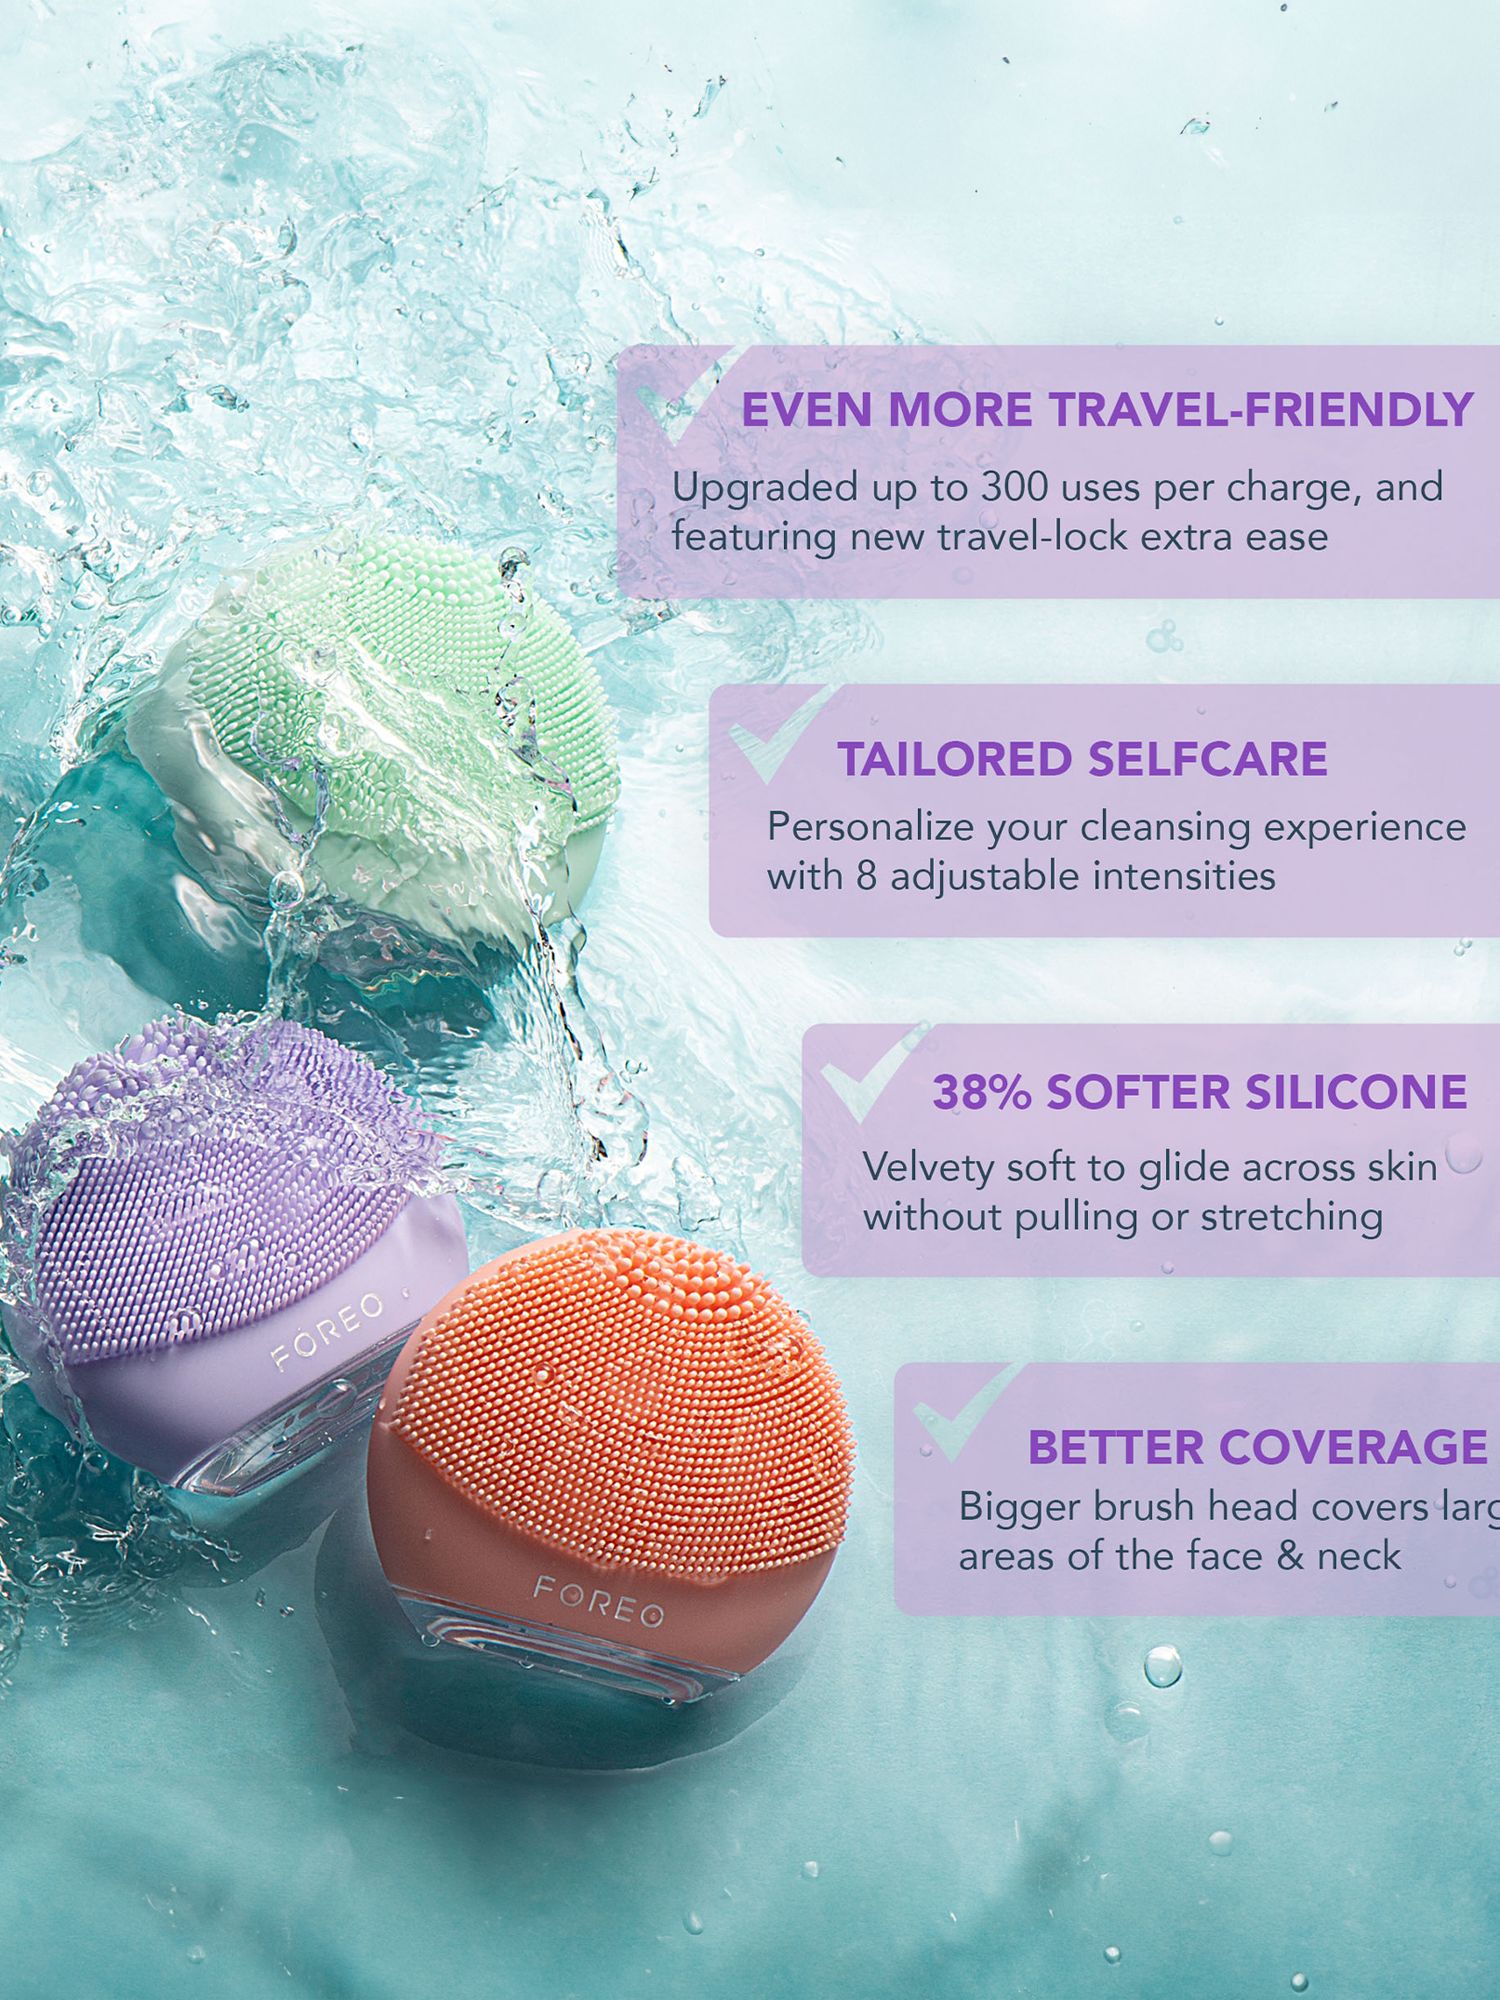 John & Device for Cleansing FOREO 2-Zone Skin All Firming Facial Partners & at 4 Lewis Go Lavender LUNA Types,